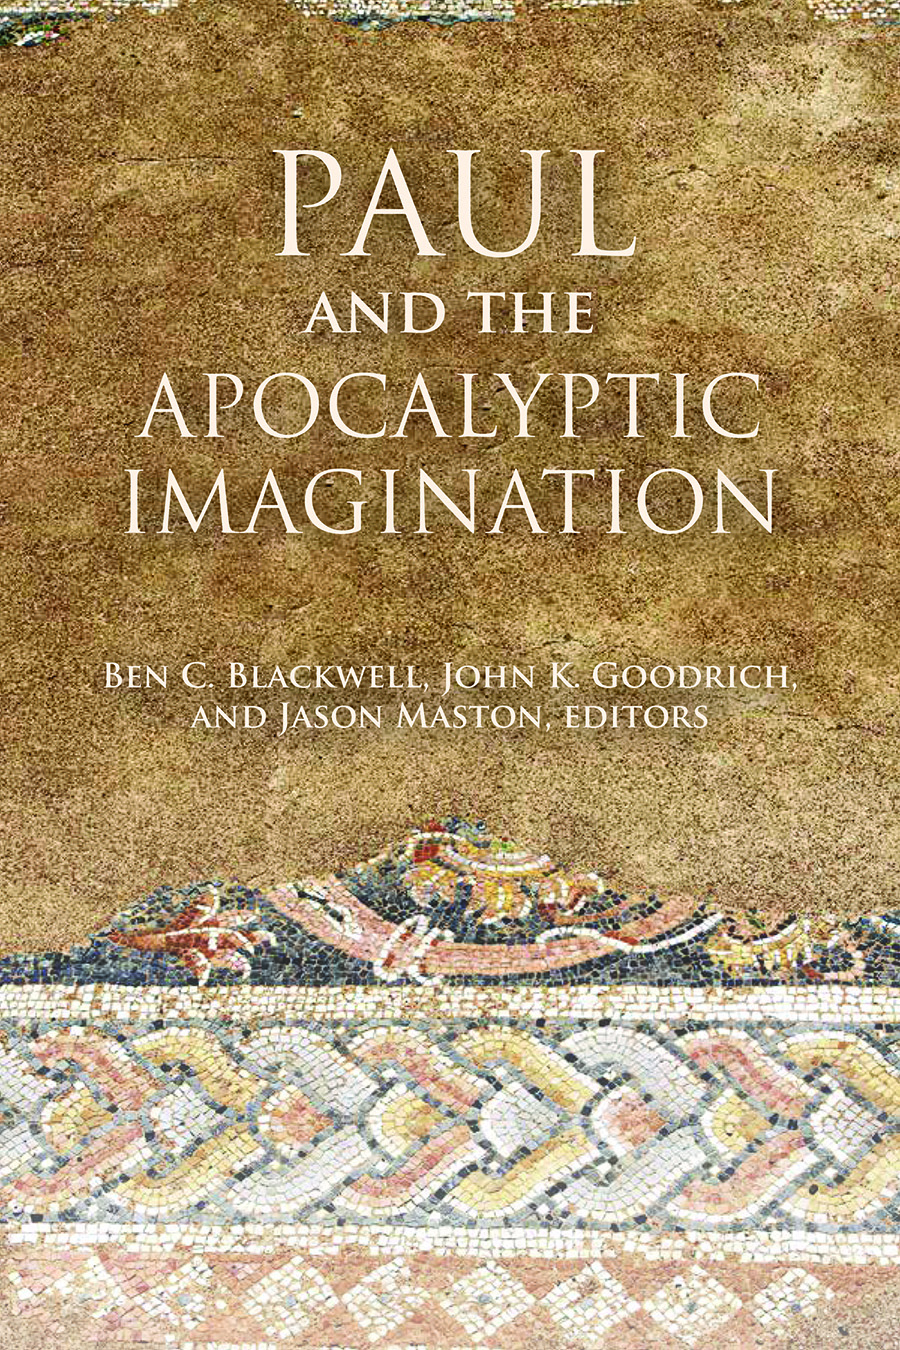 The Two Ages and Salvation History in Paul's Apocalyptic Imagination: A Comparison of 4 Ezra and Galatians